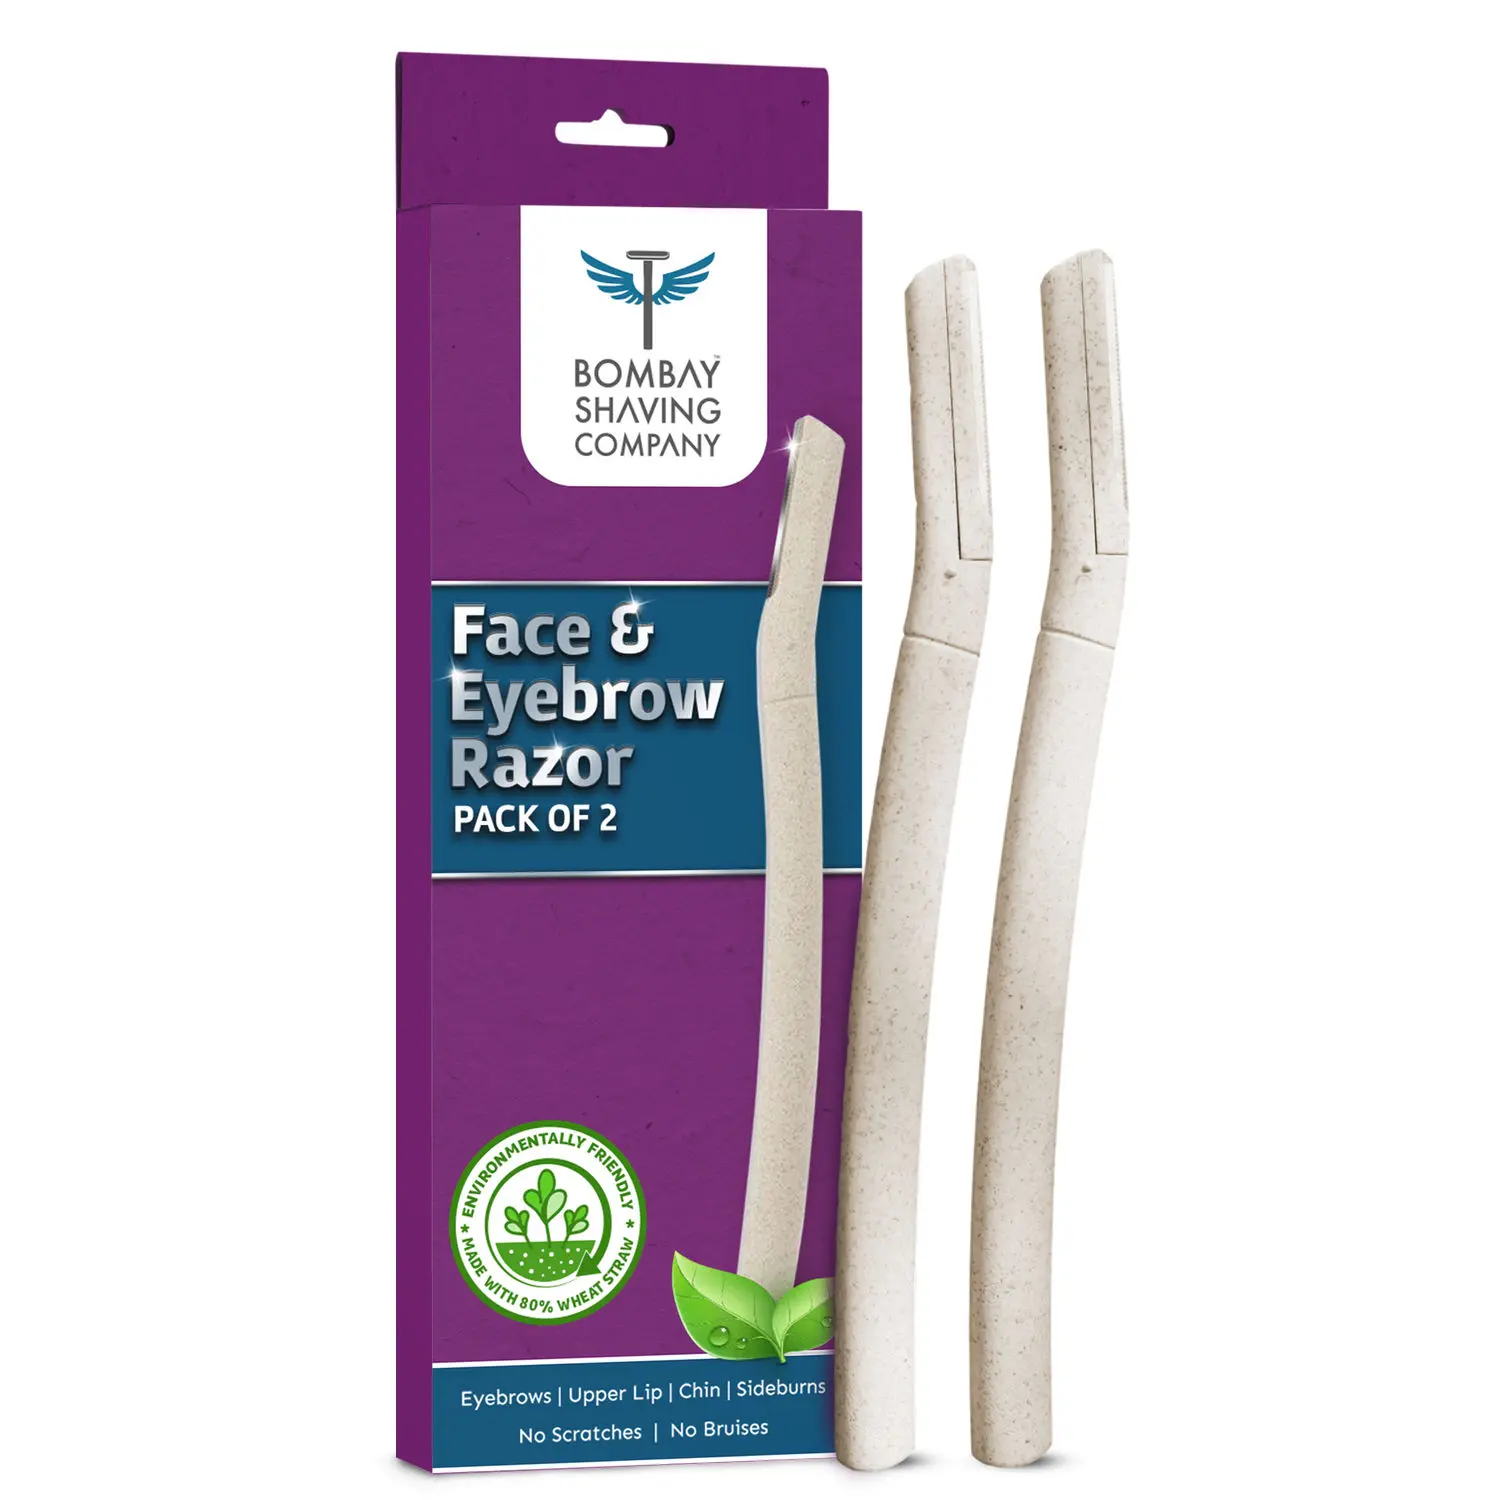 Bombay Shaving Company Face & Eyebrow Razor (Pack of 2) | Reusable & Biodegradable Face Razor For Women | Quick & Easy Facial Hair Removal At Home 200 gm